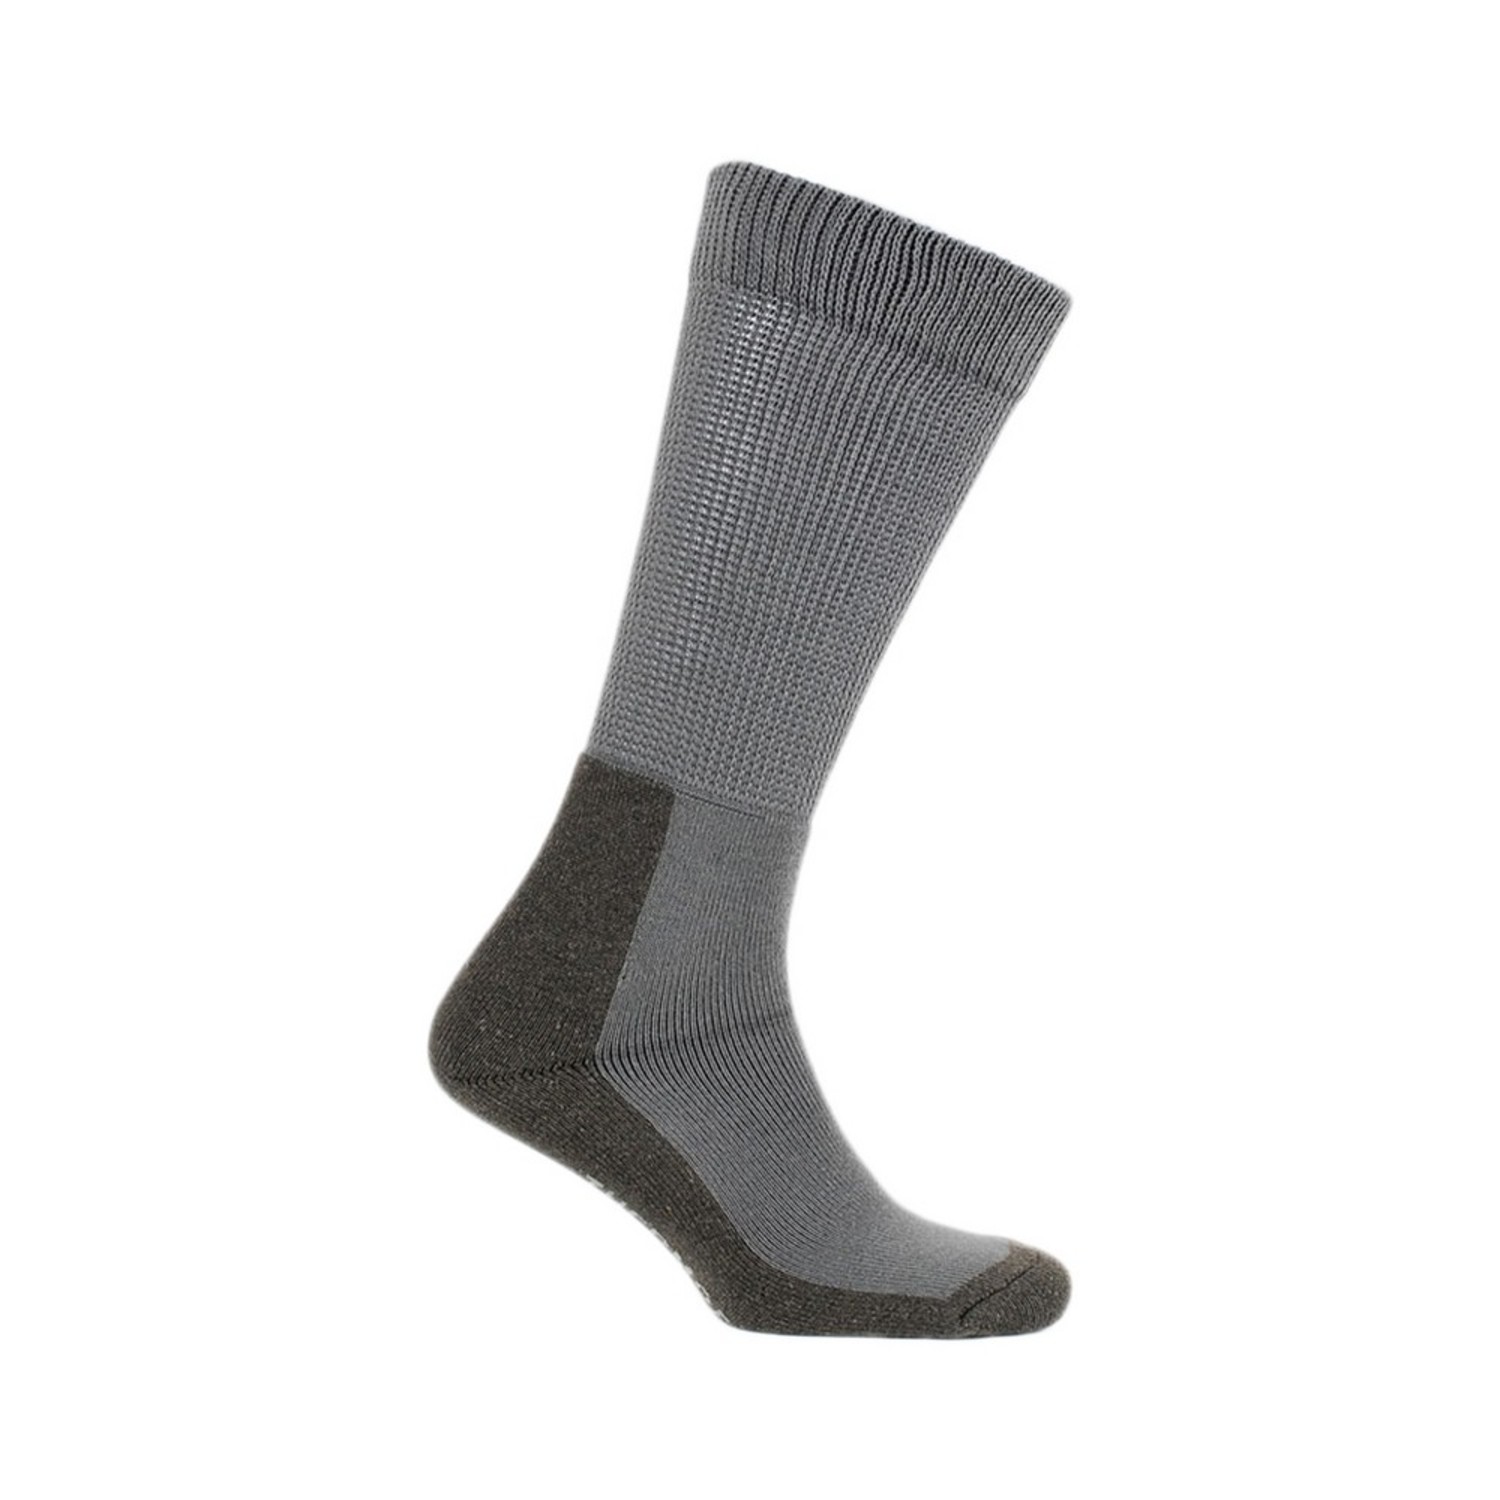 Hunting Socks // Khaki (35-38) - Thermoform - Touch of Modern